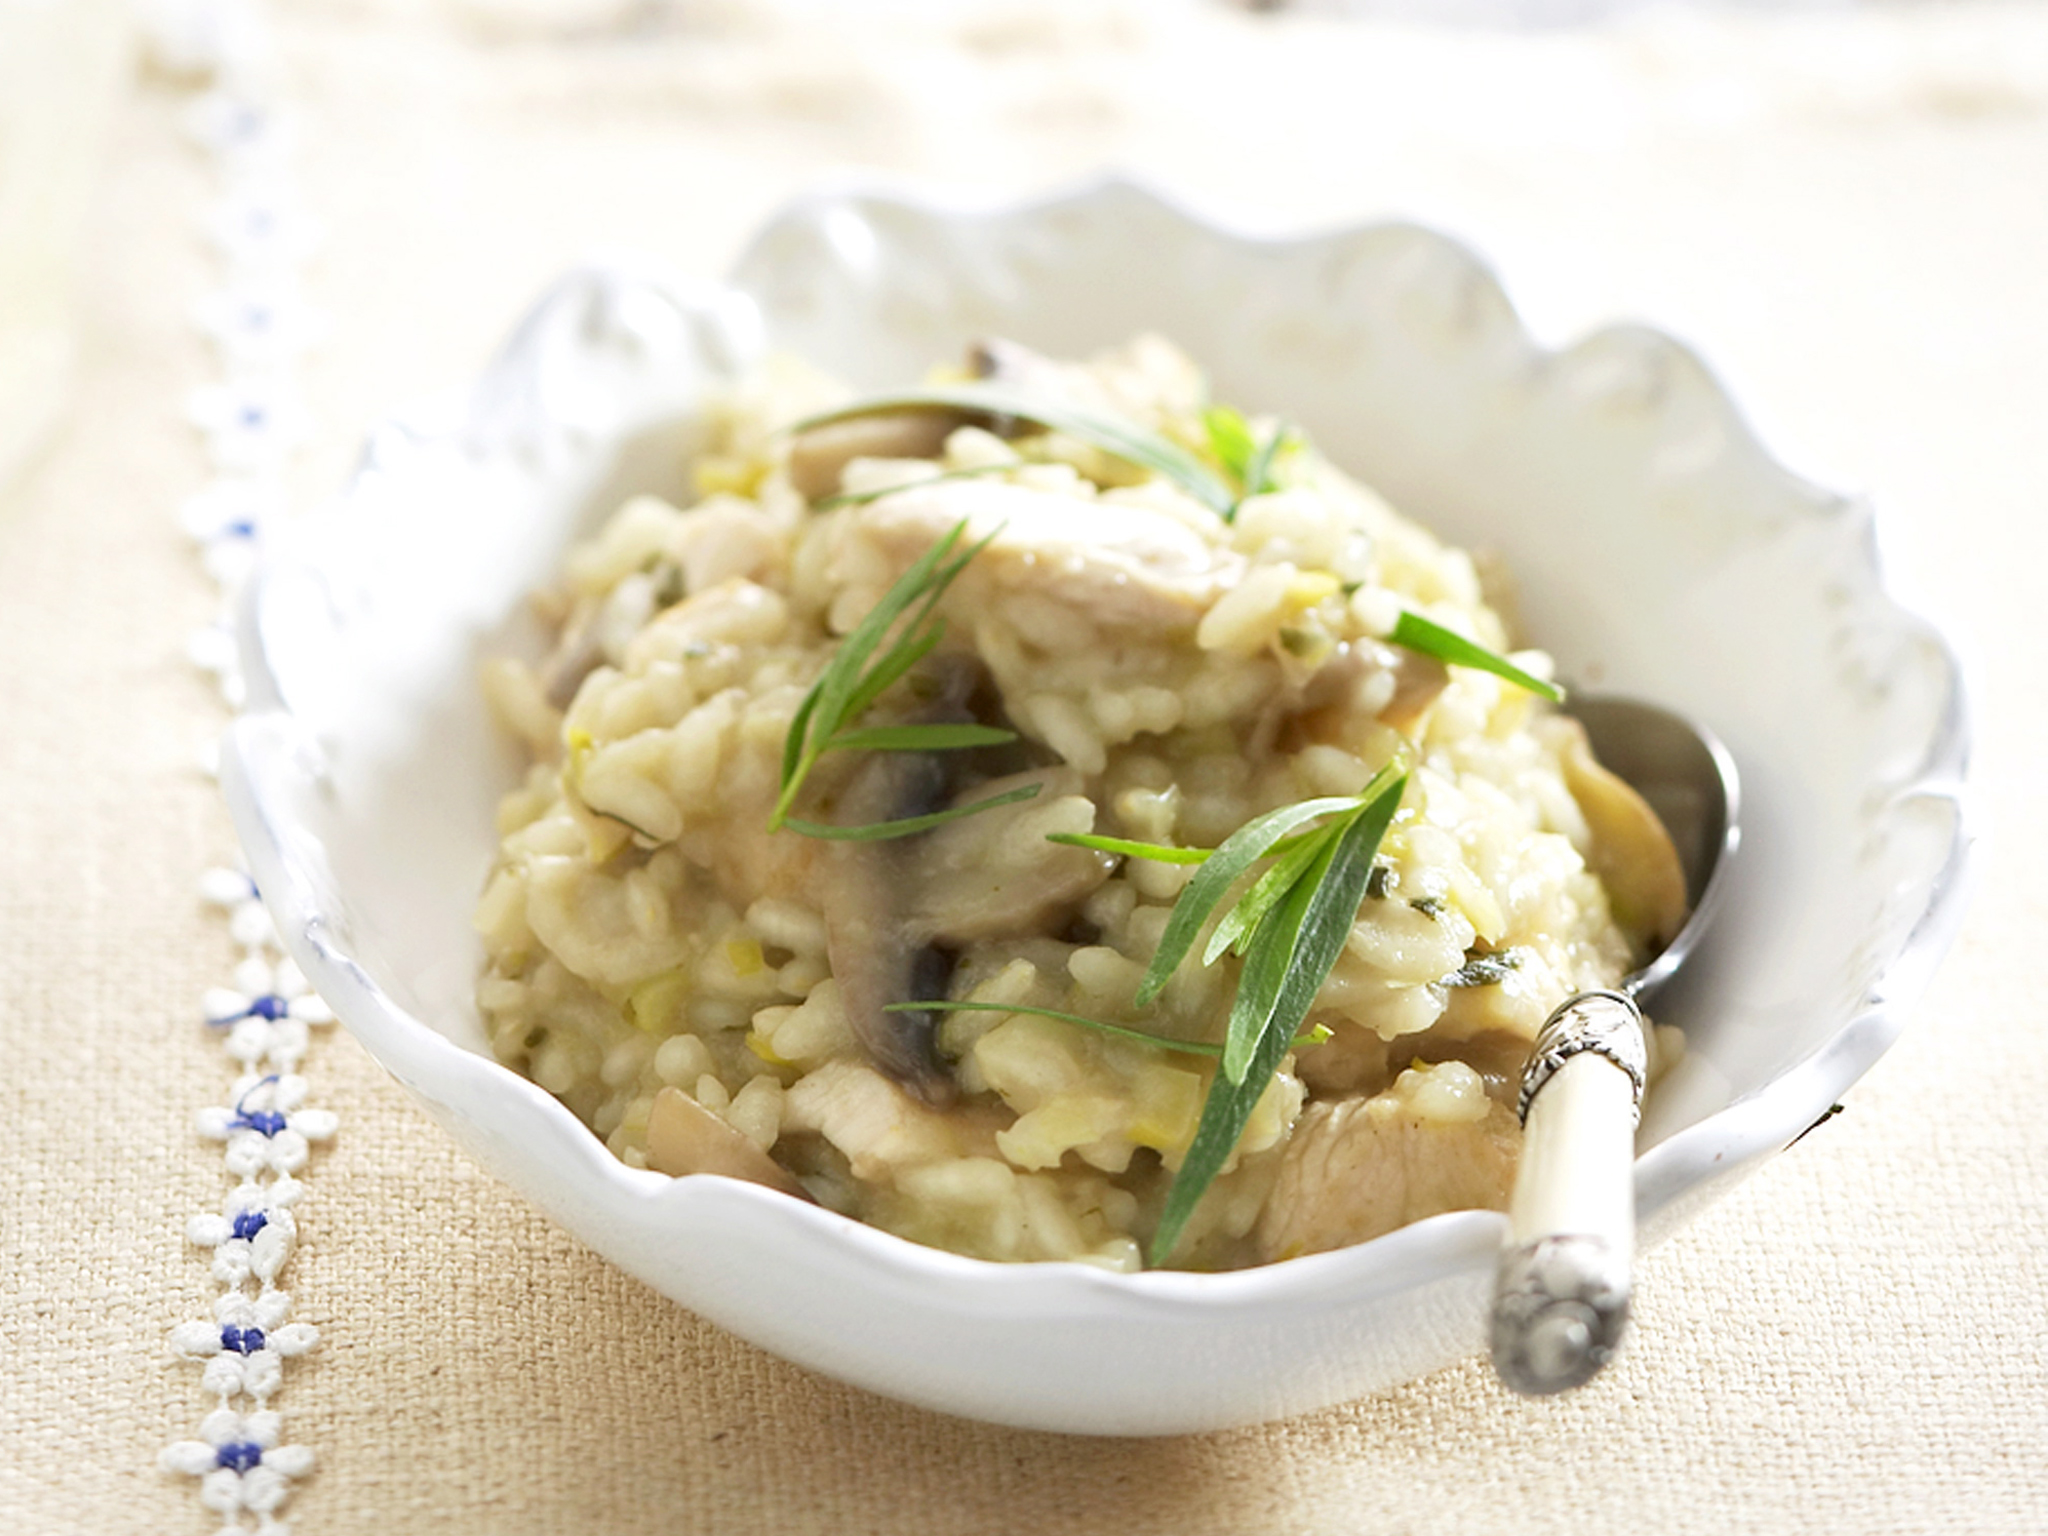 Chicken and leek risotto